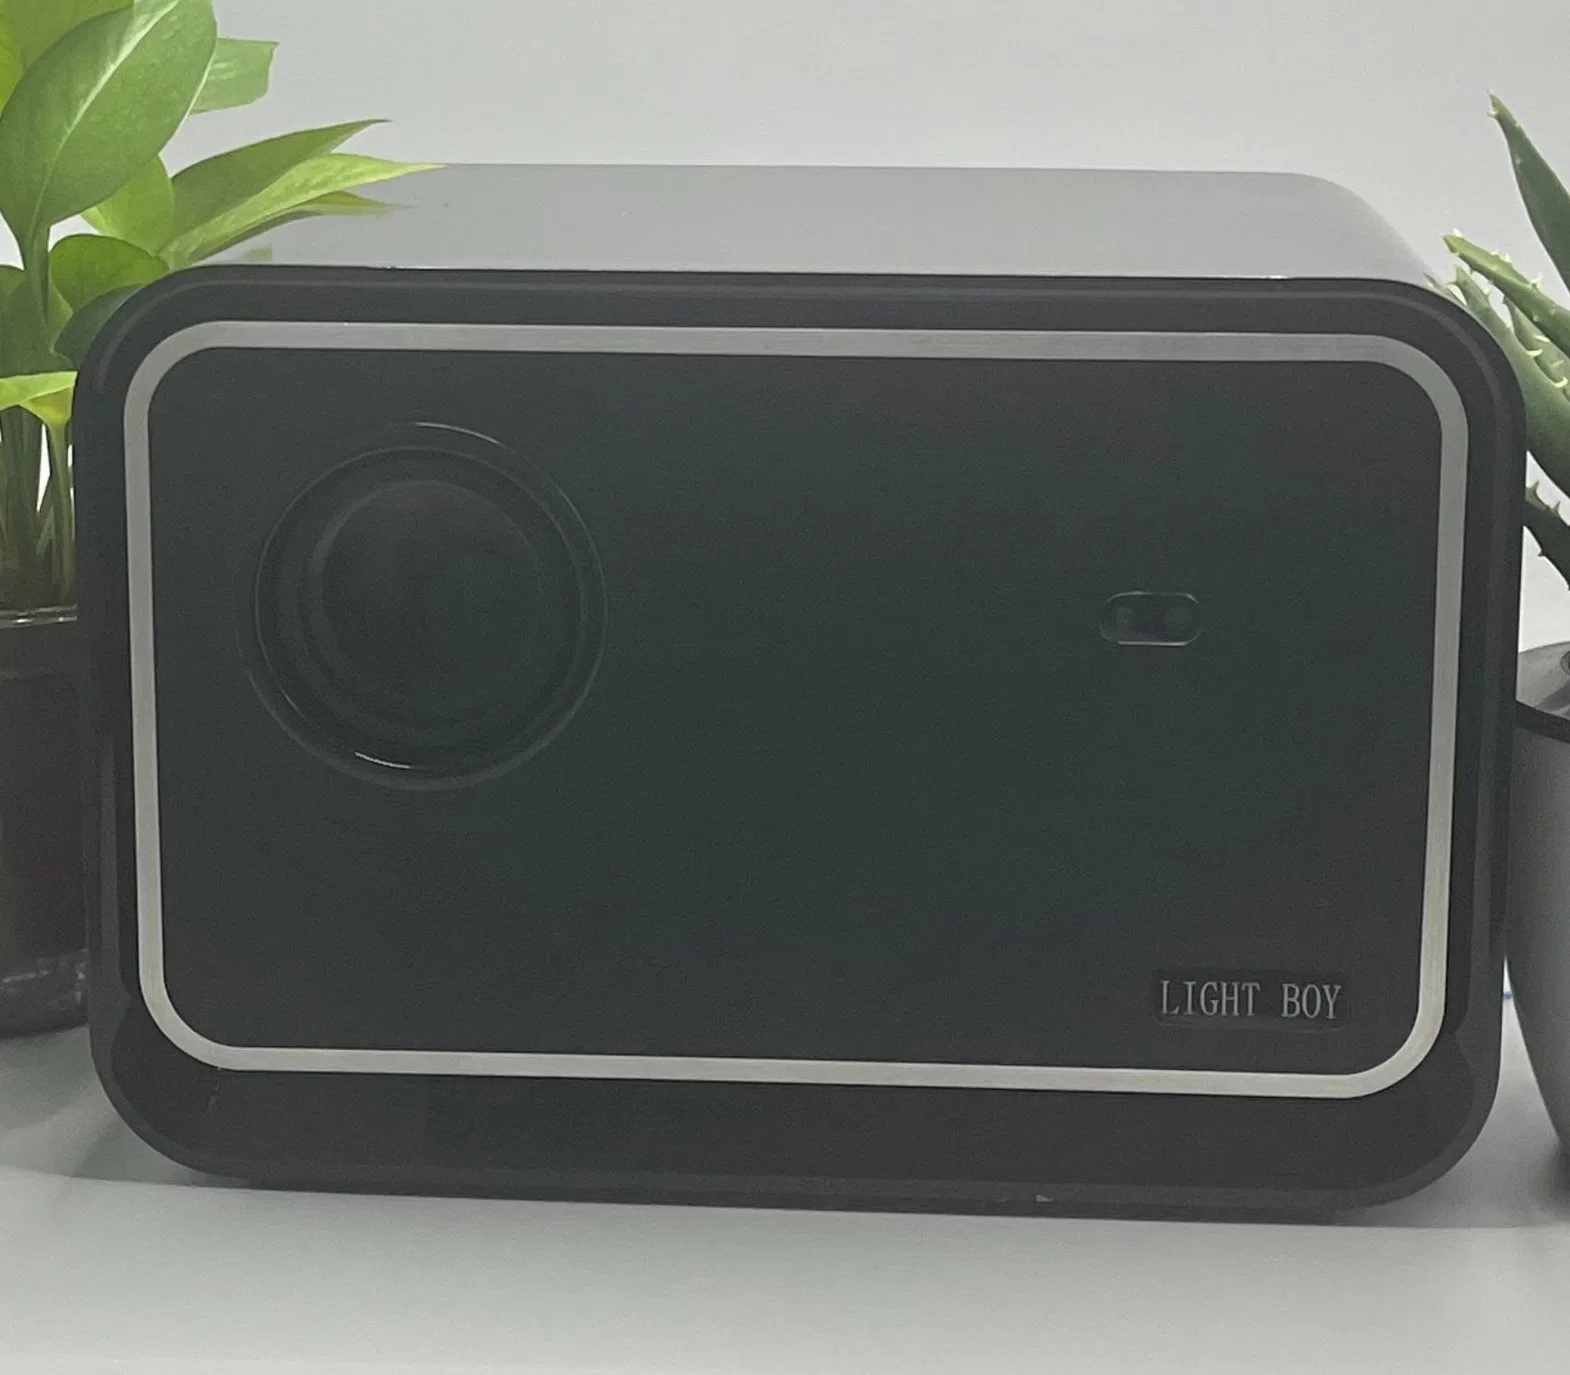 Lightboy 4K Video Android Home Hotel Projector TV